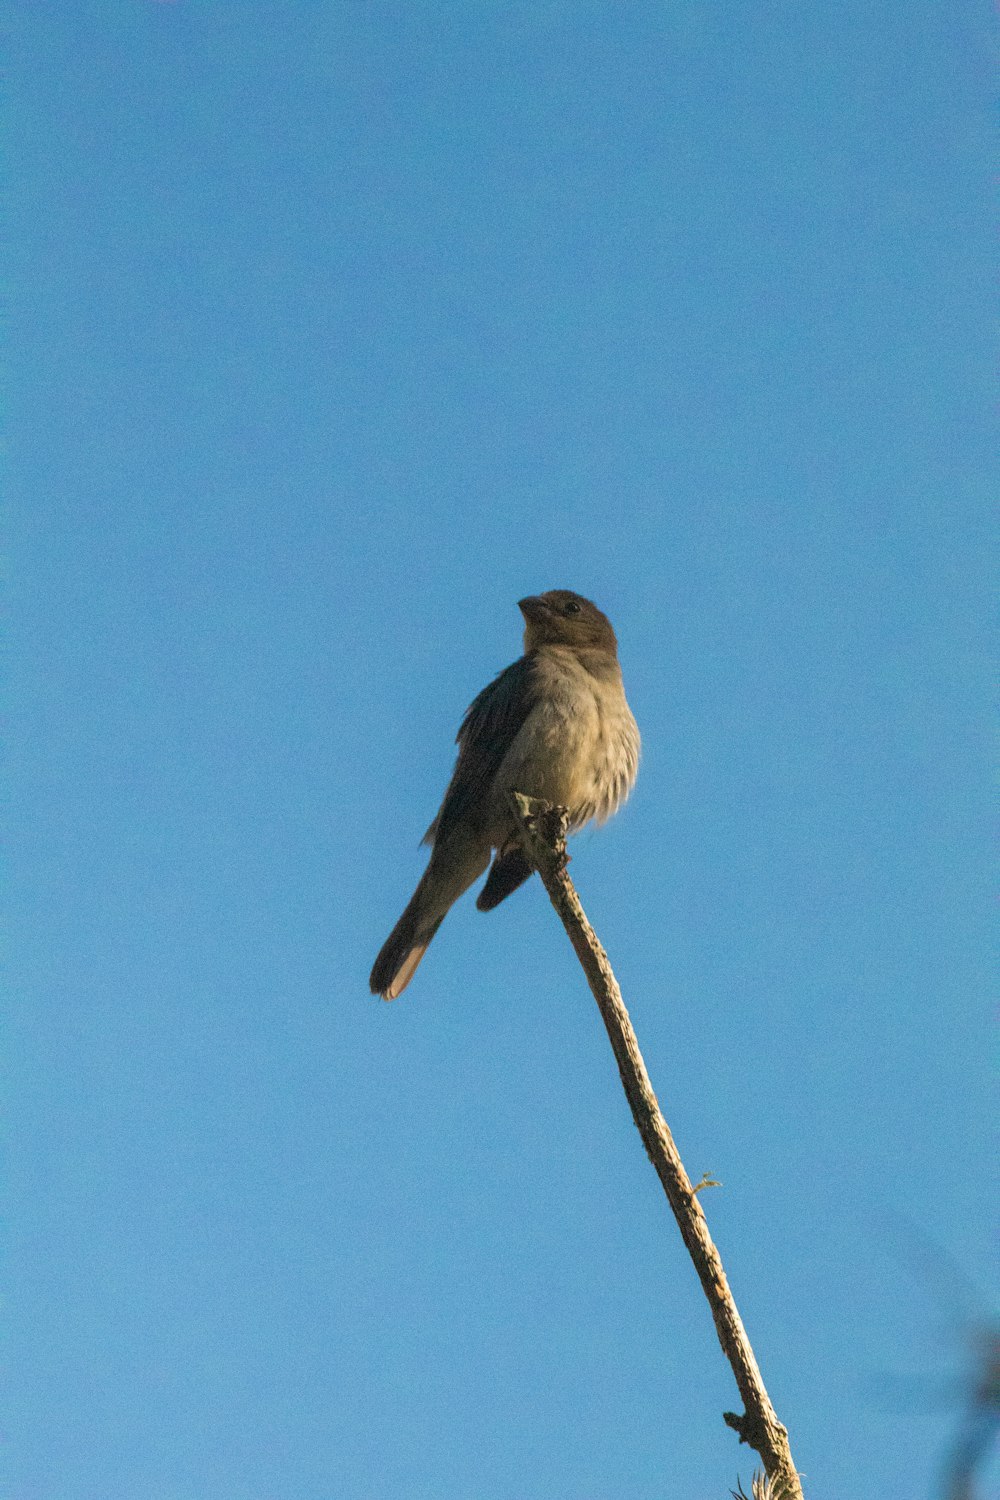 brown bird perched on brown stick during daytime